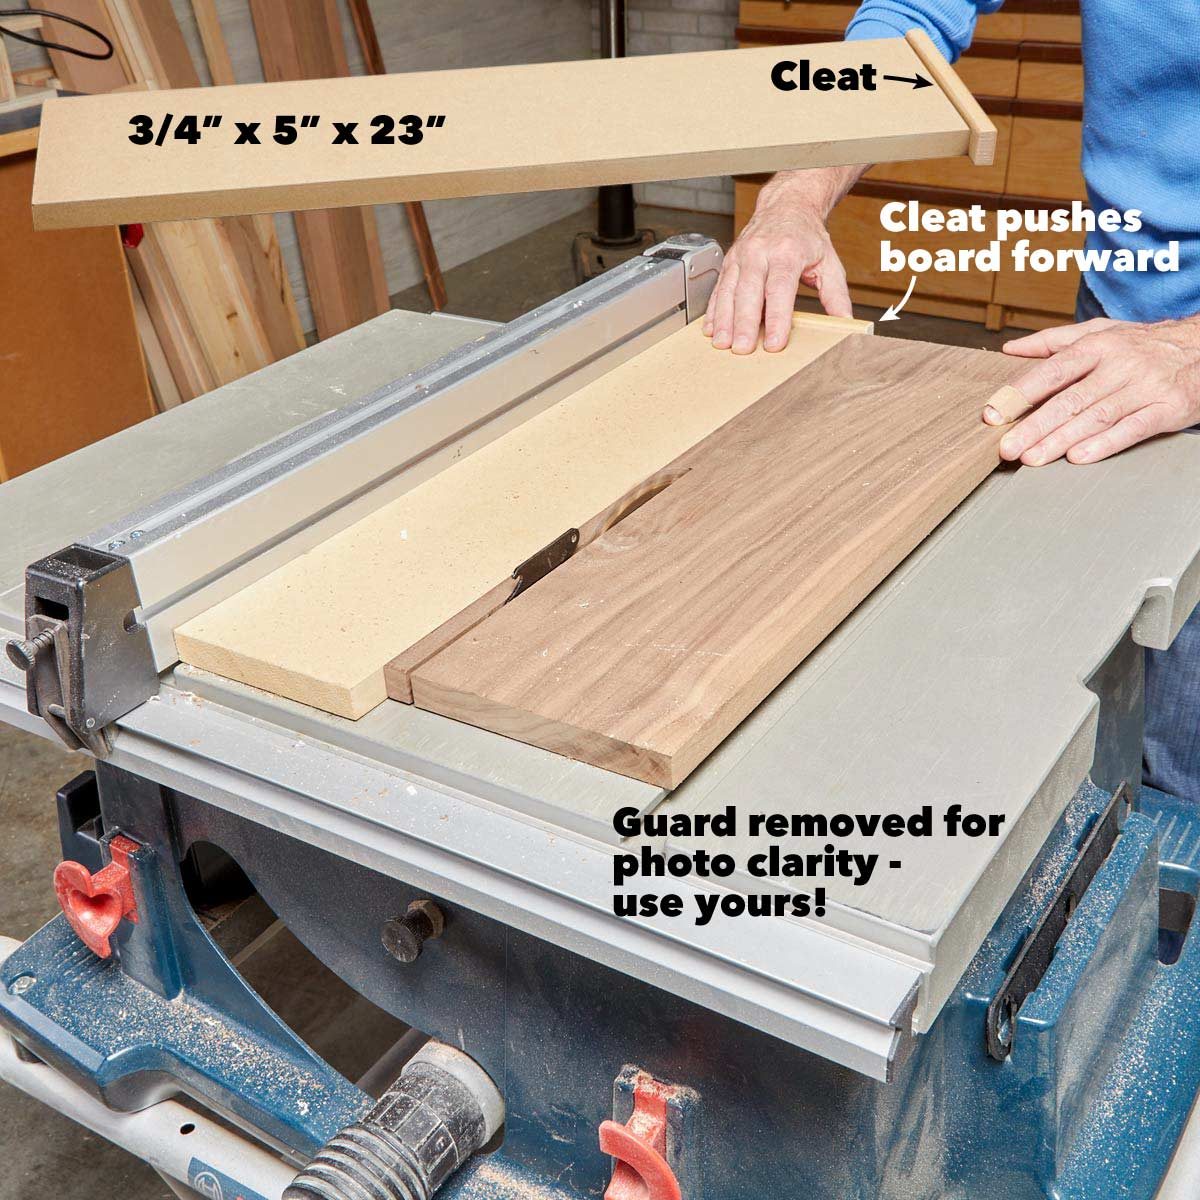 How to Make a Cutting Board Kit - The Handyman's Daughter